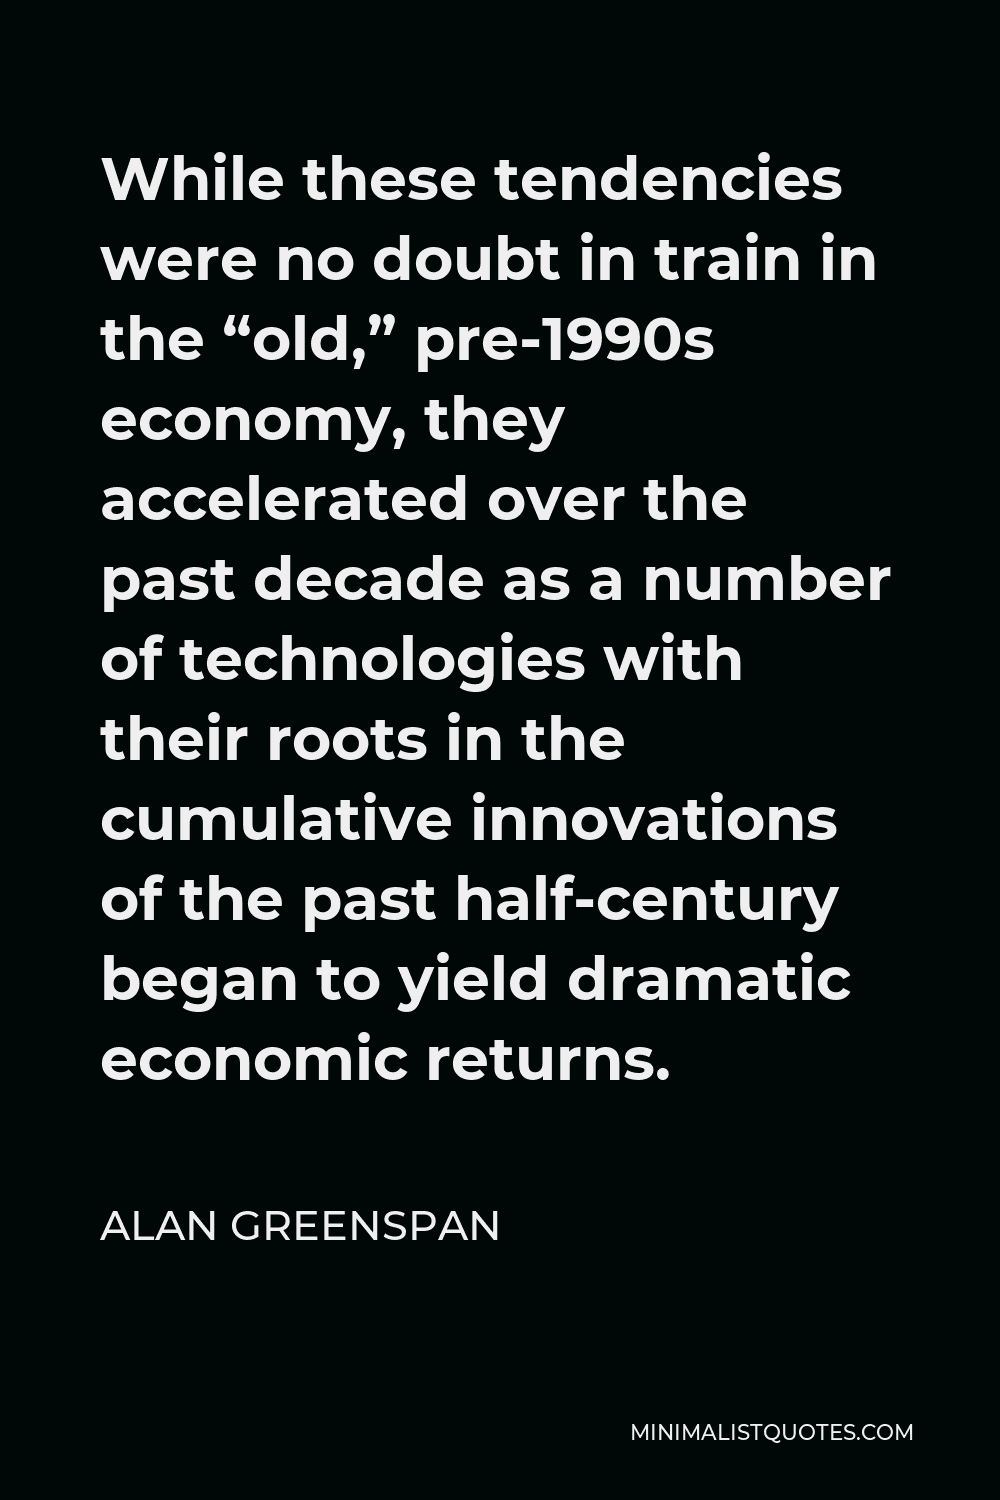 Alan Greenspan Quote - While these tendencies were no doubt in train in the “old,” pre-1990s economy, they accelerated over the past decade as a number of technologies with their roots in the cumulative innovations of the past half-century began to yield dramatic economic returns.